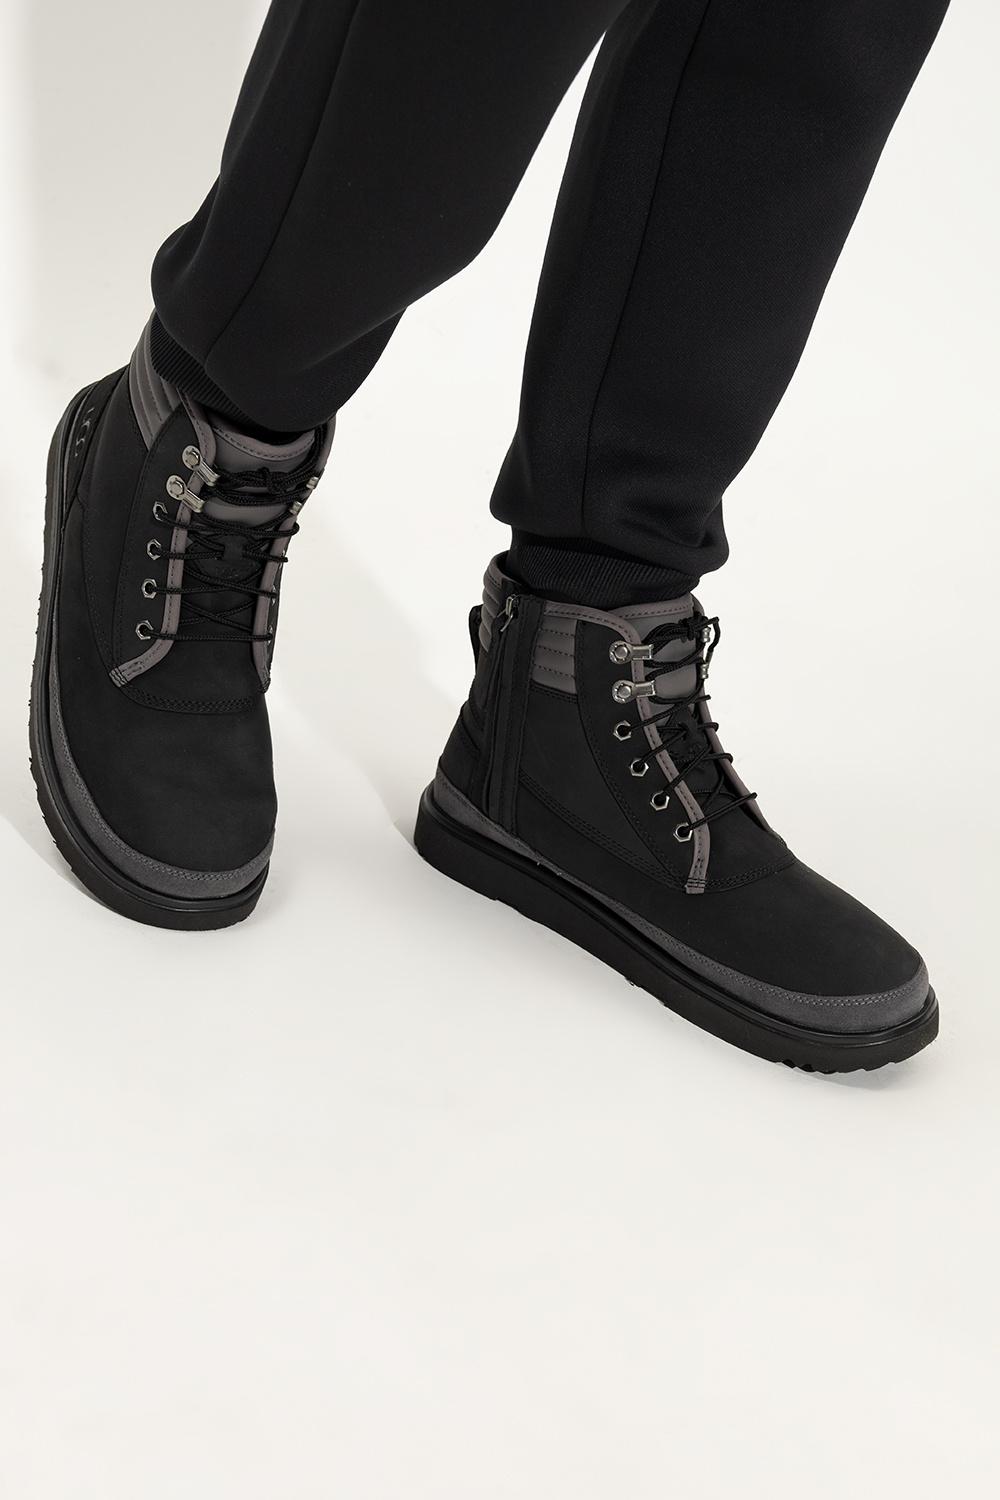 UGG 'highland Sport' Insulated Boots in Black for Men | Lyst